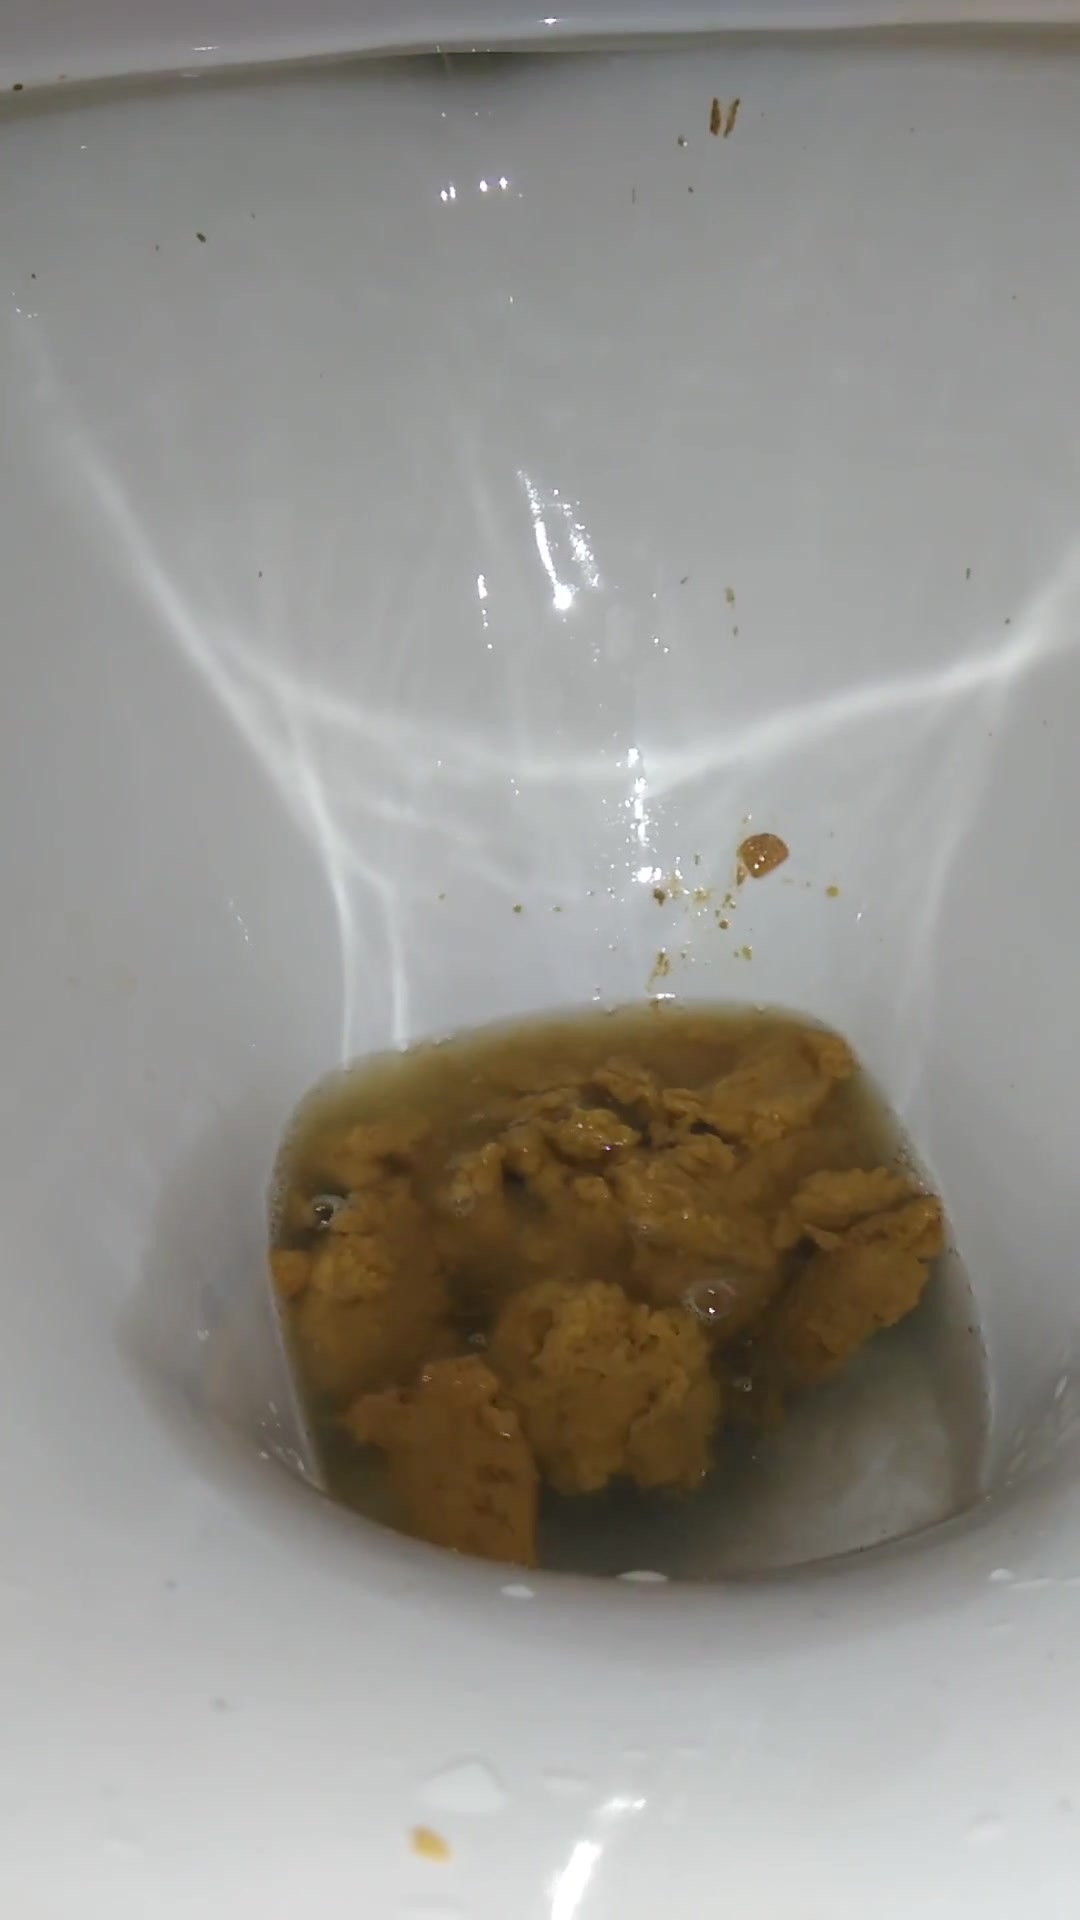 Farty dump on friends toilet after eating kebabs the night before